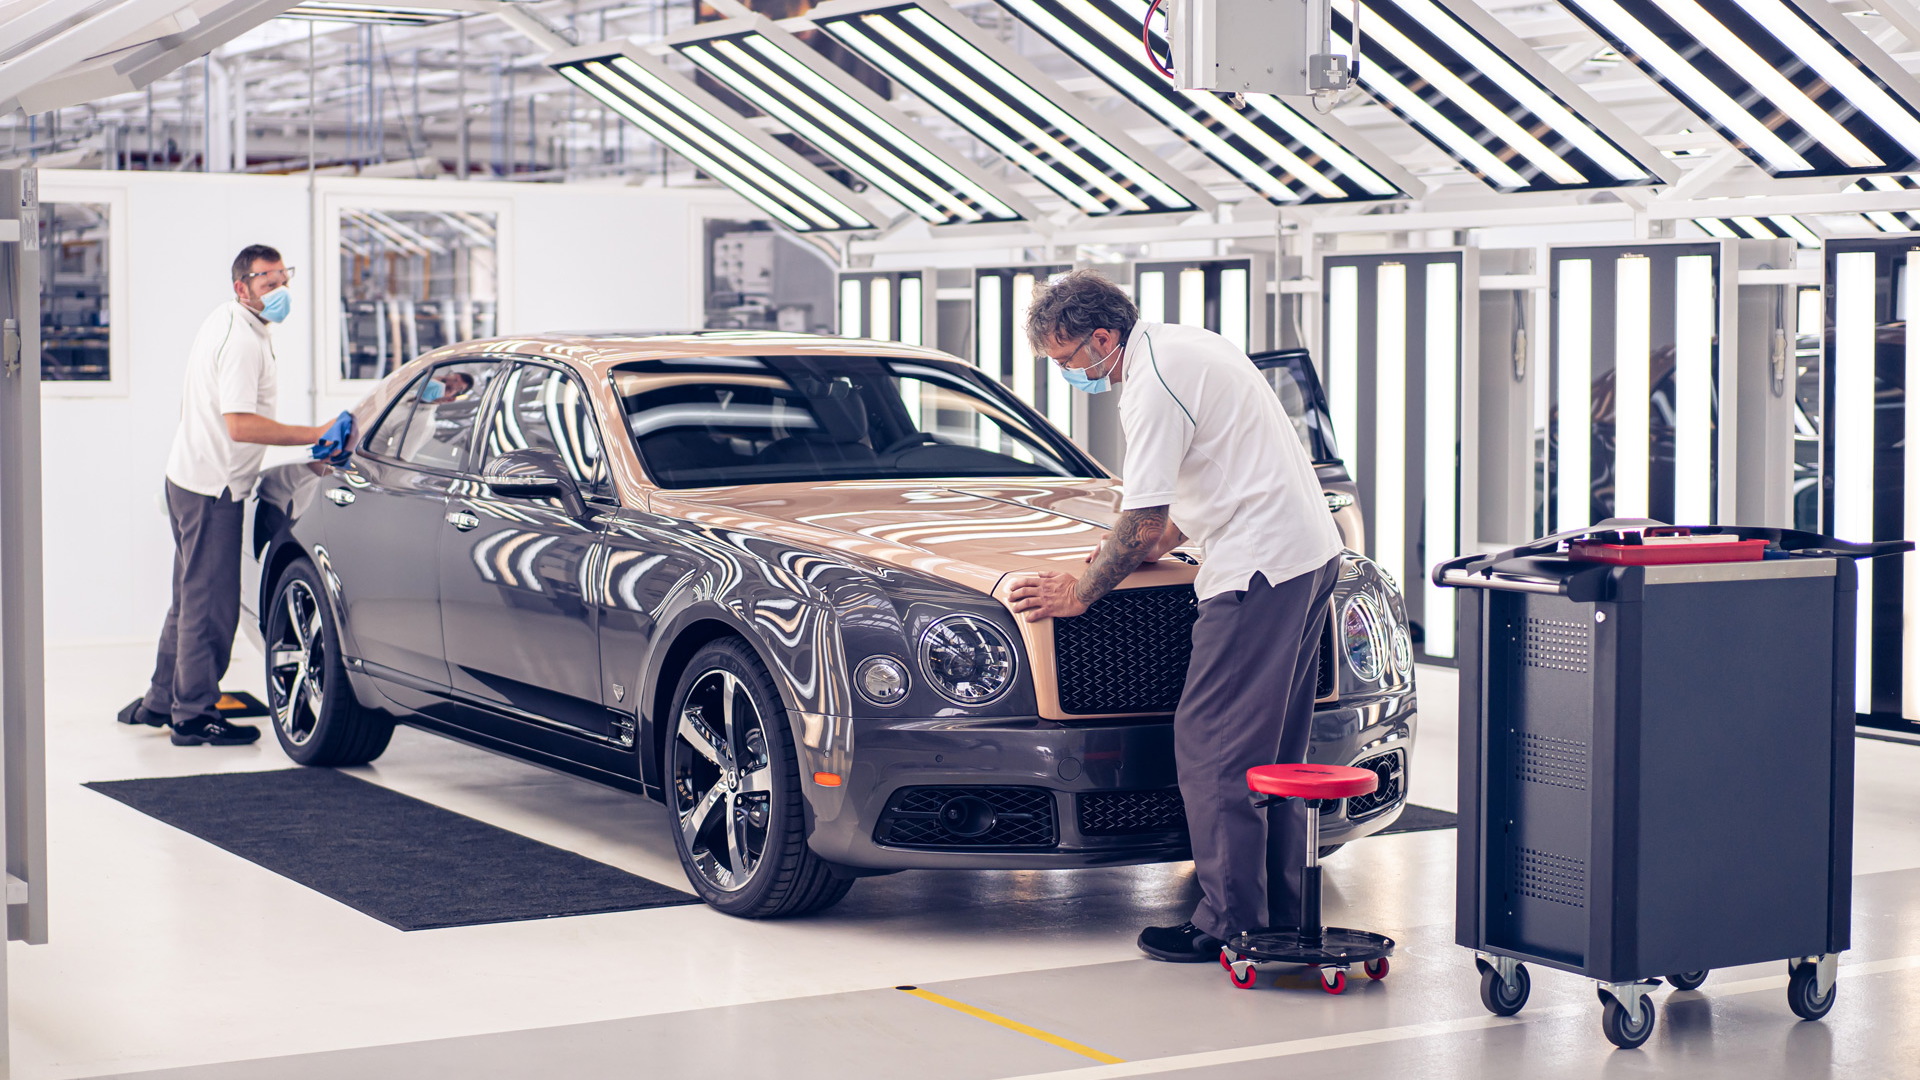 Bentley Mulsanne production comes to an end - June 2020